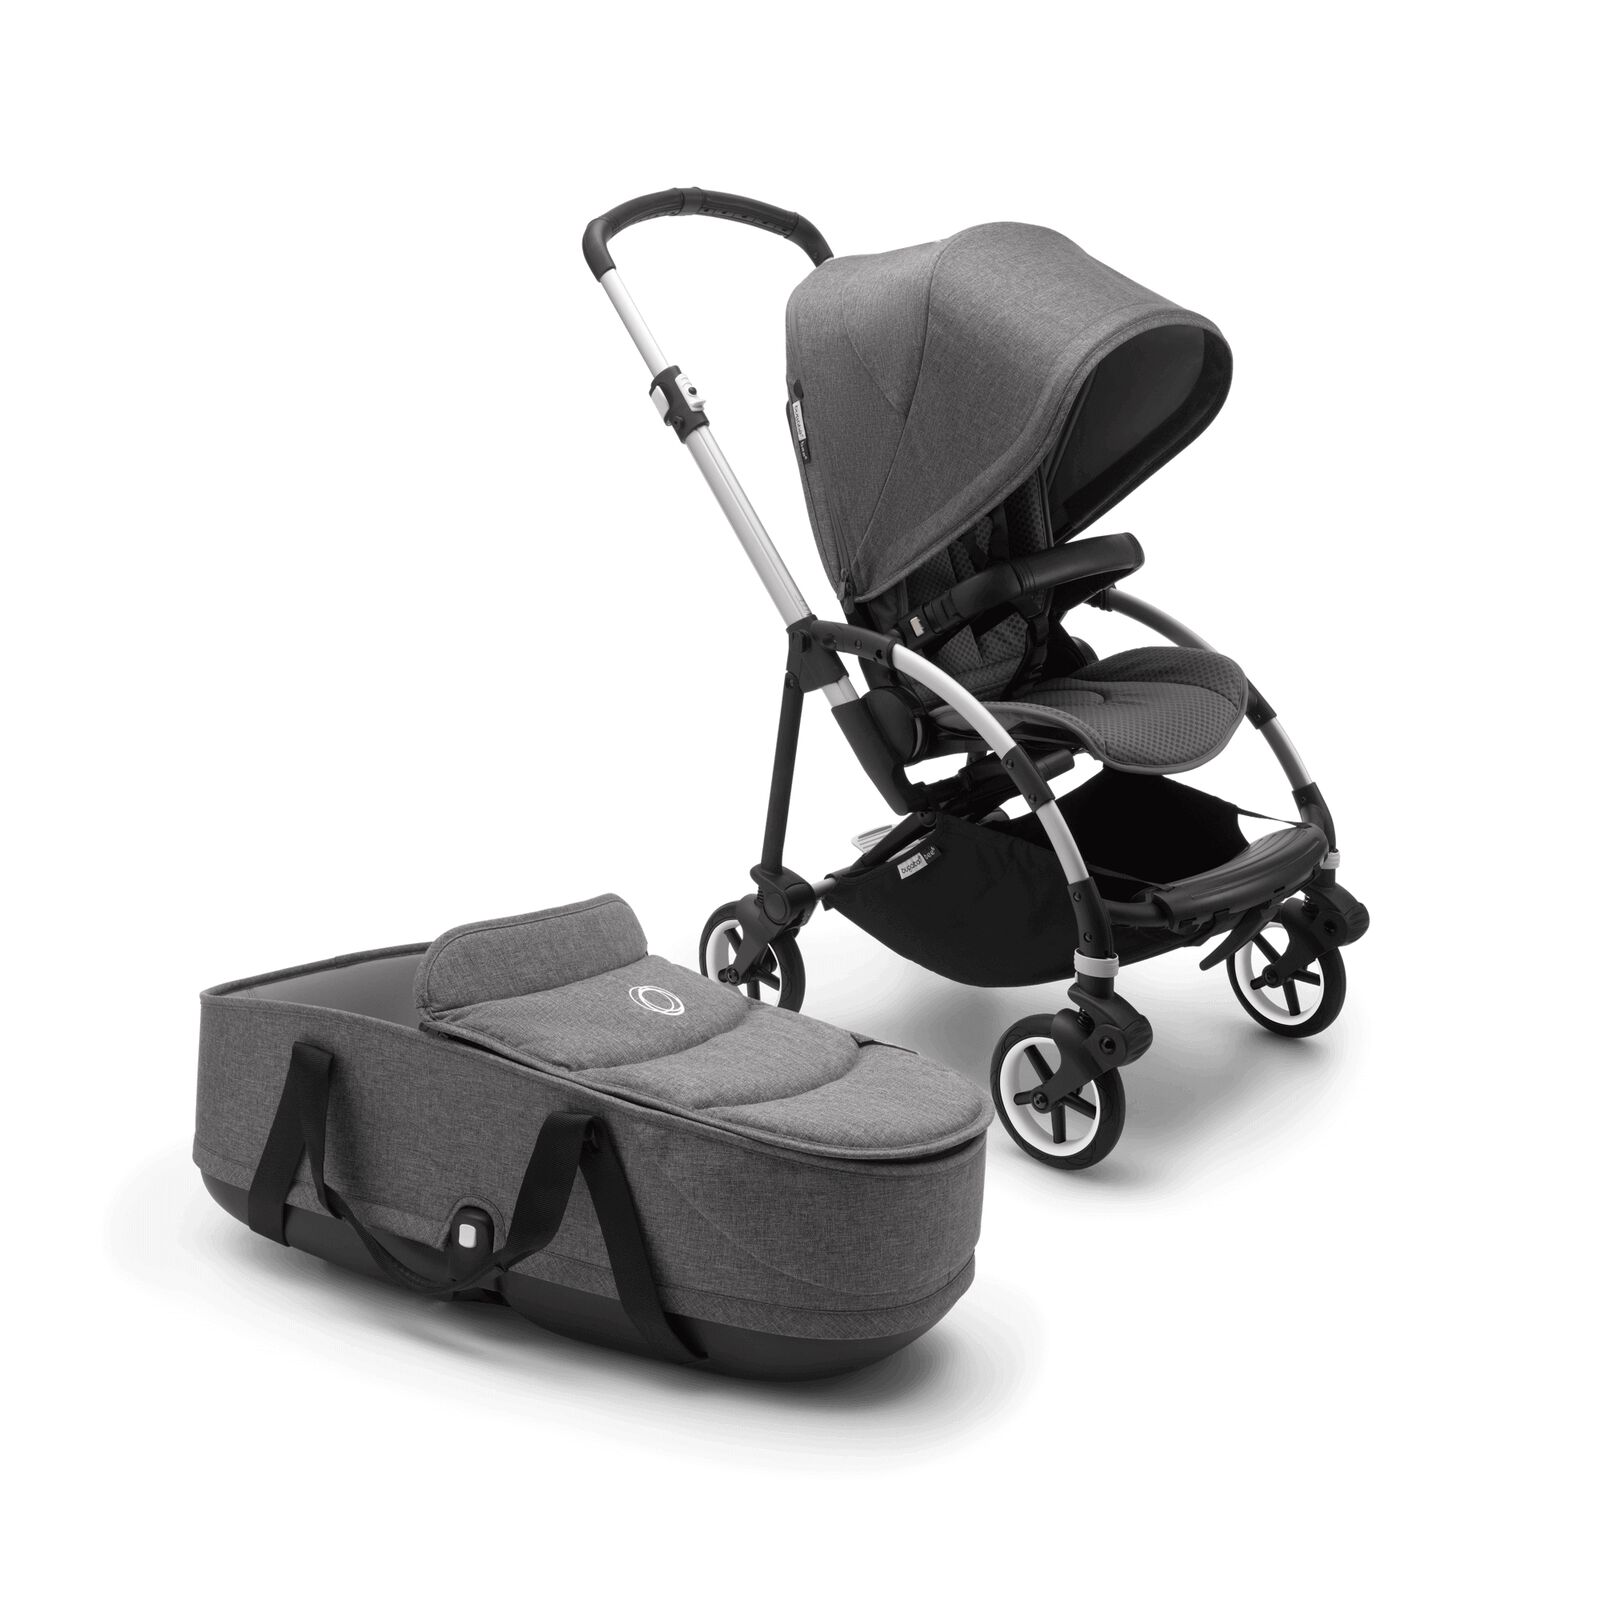 Bugaboo Bee 6 seat and bassinet stroller - View 7